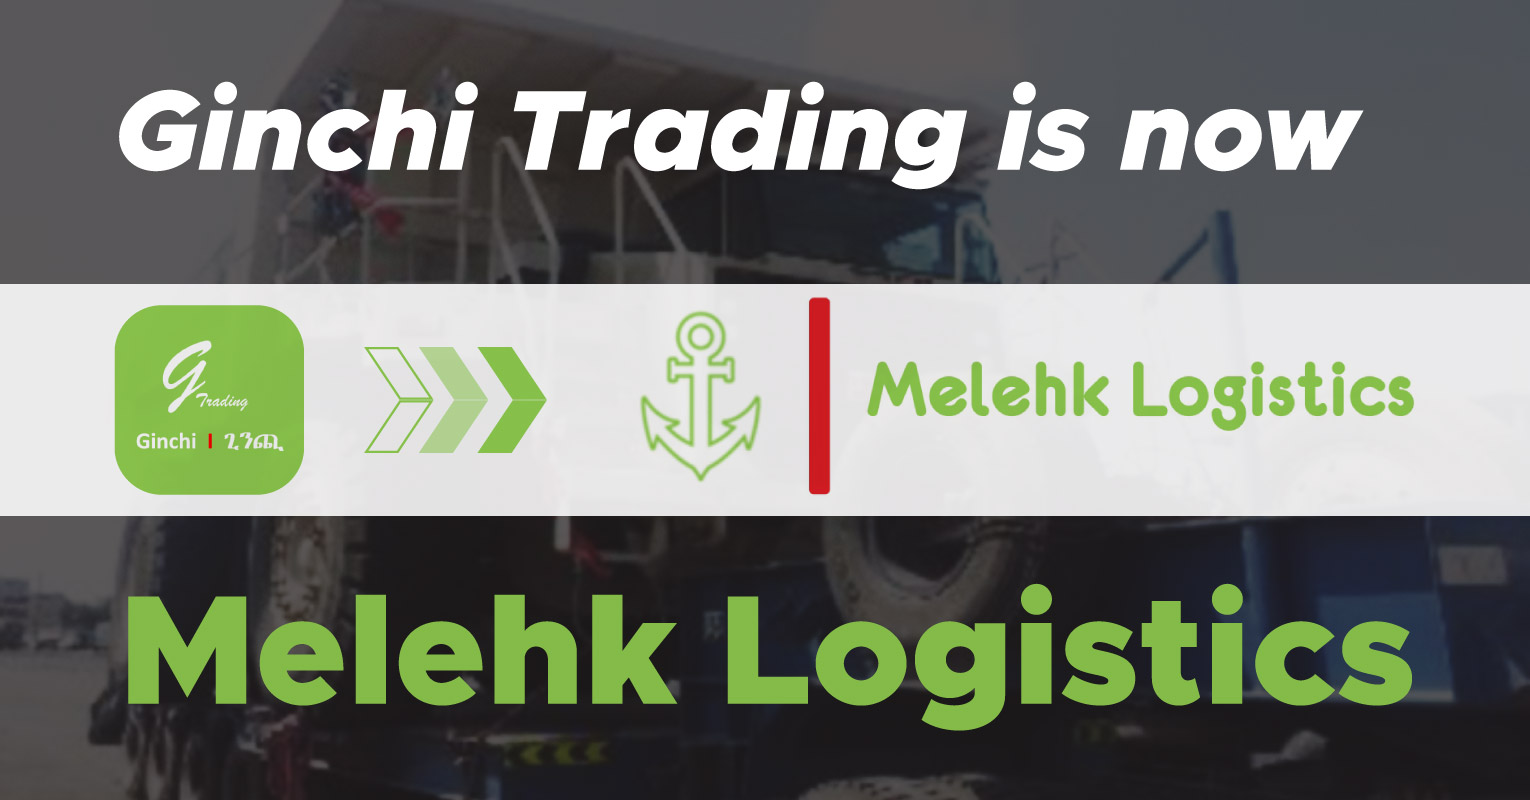 CLC Projects member Ginchi Trading representing Ethiopia is now Melehk Logistics